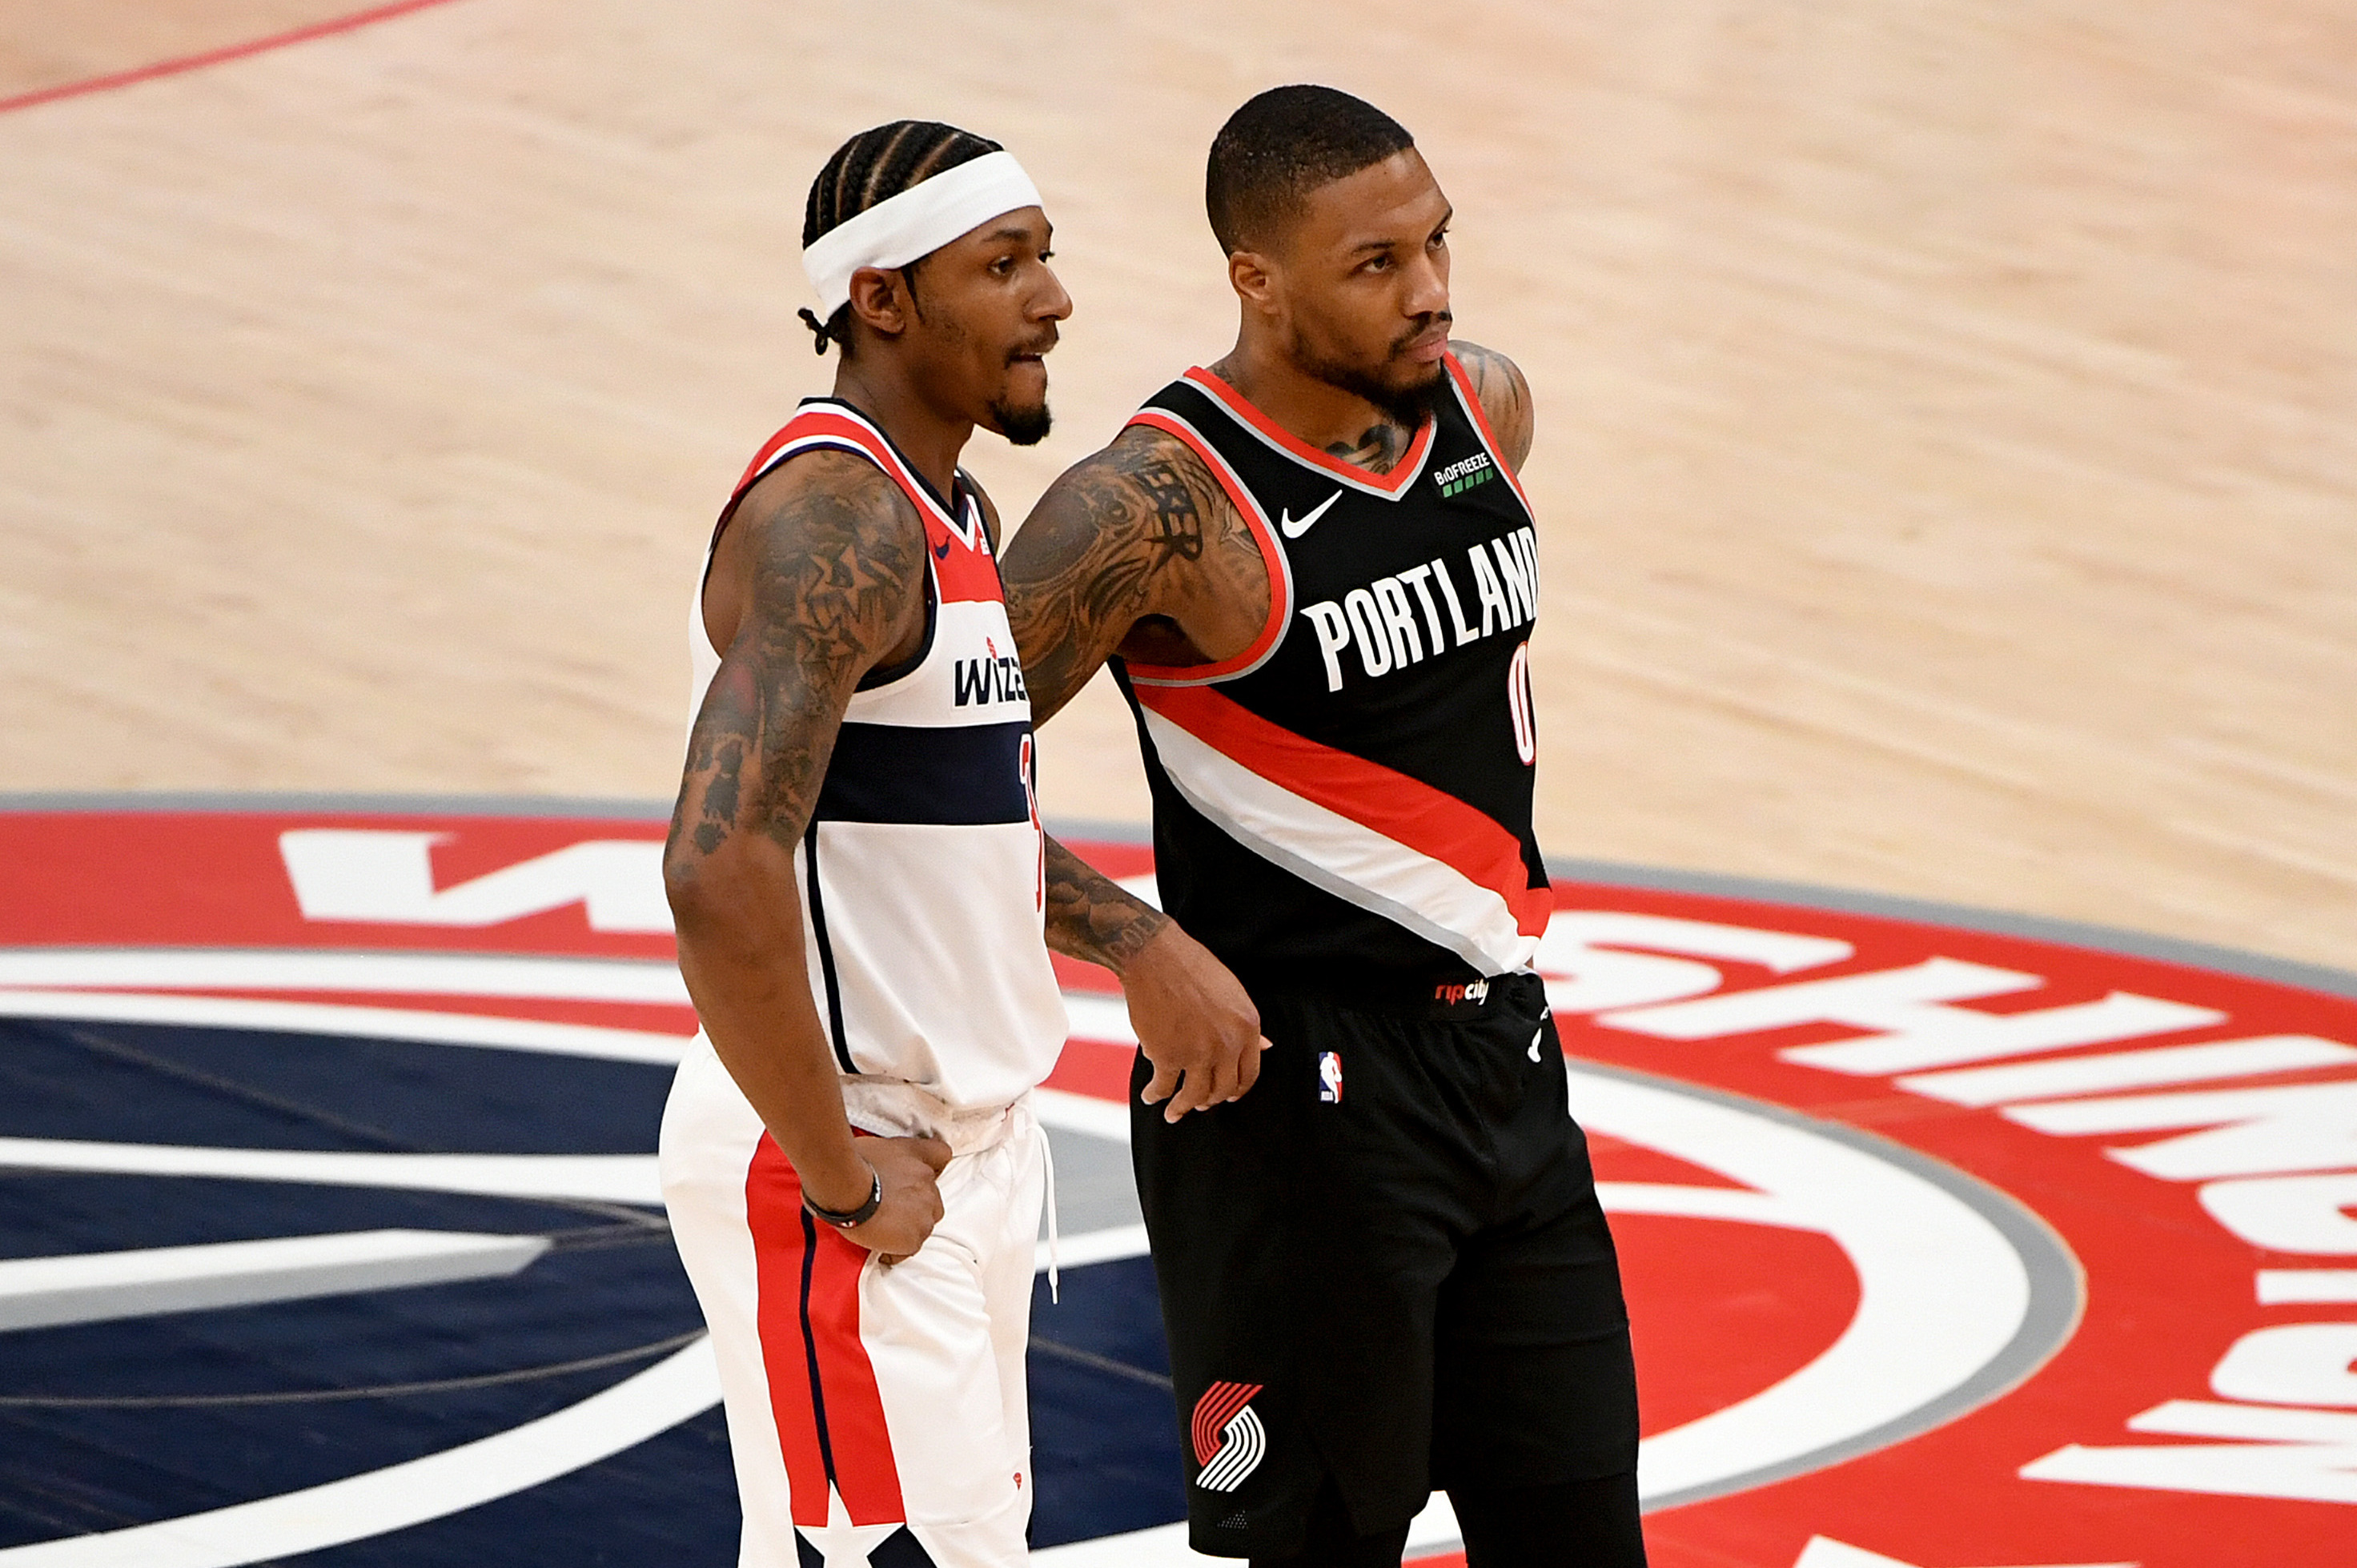 Do you wish the Sixers would've tried to trade for Bradley Beal